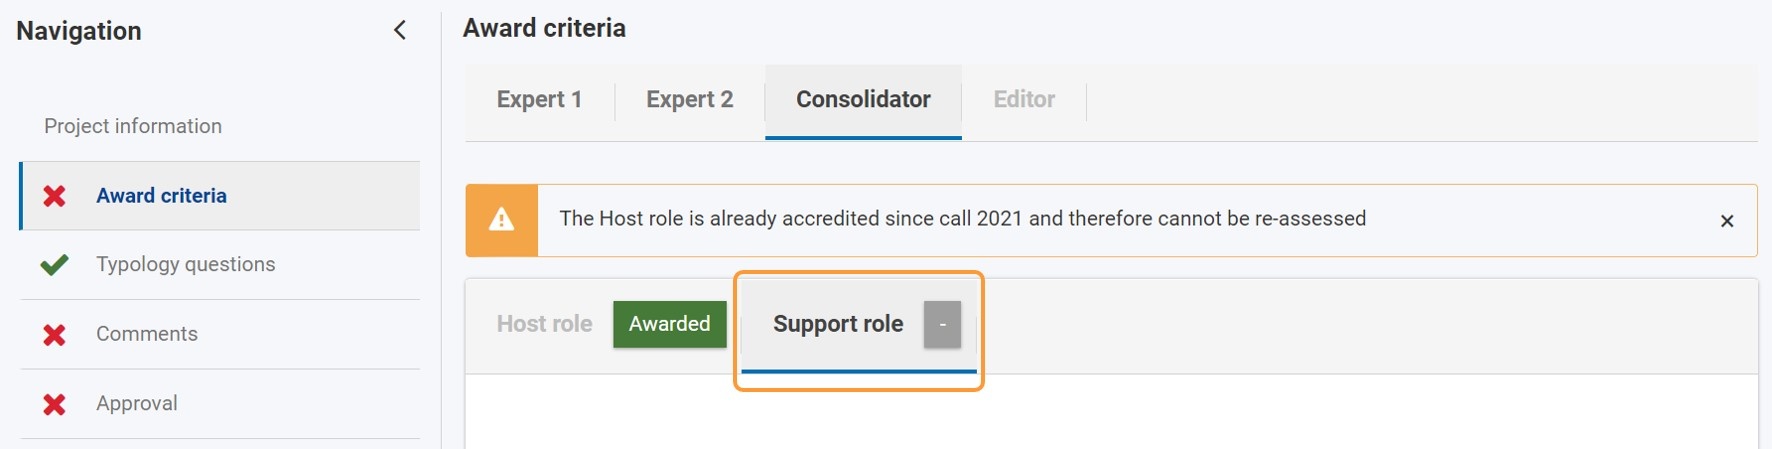 Sub tabs in Consolidator assignment where Host role attained in previous year 